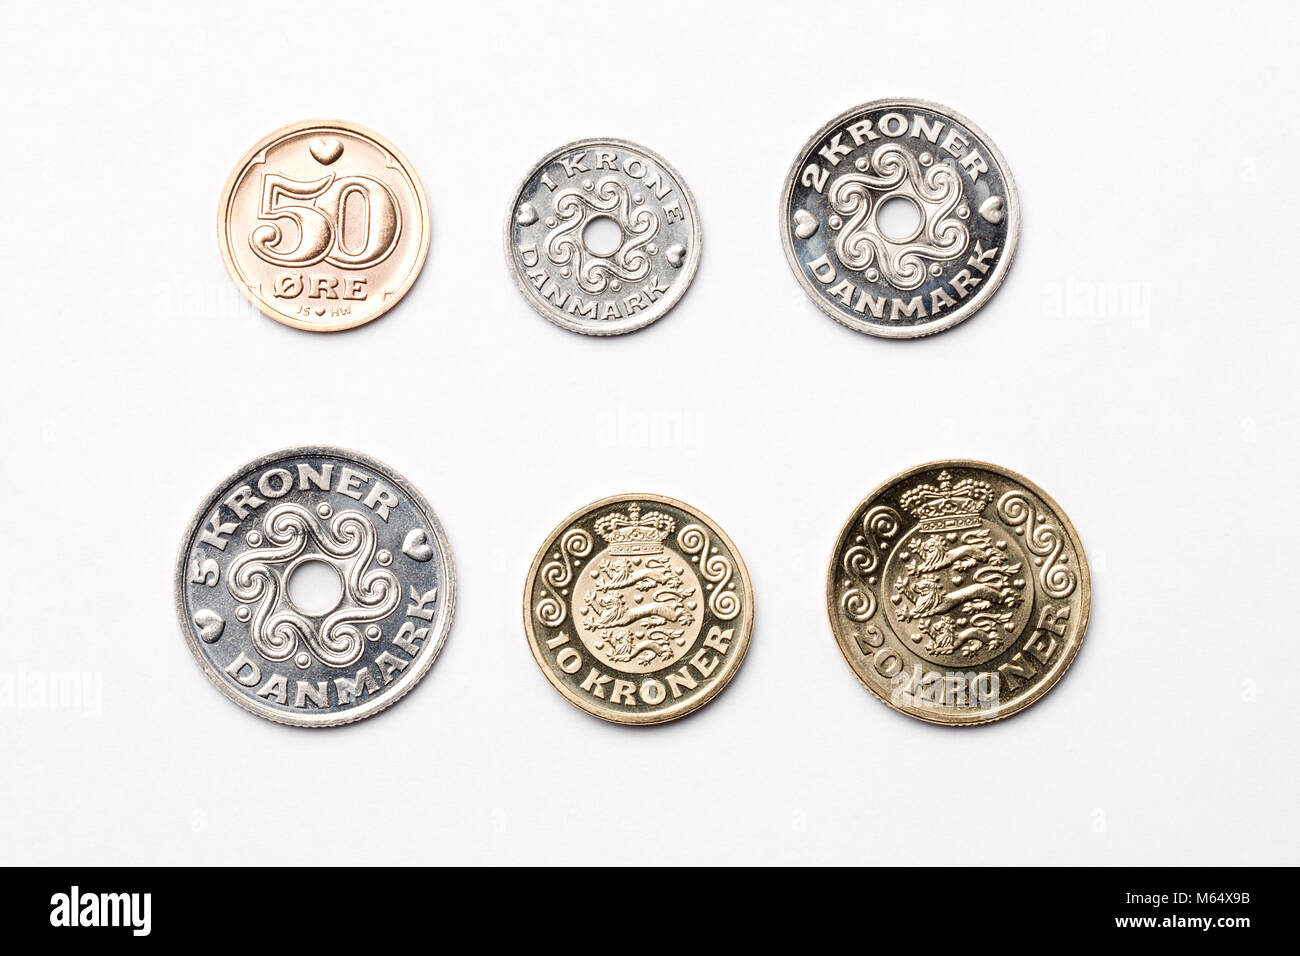 Danish coins on a white background Stock Photo